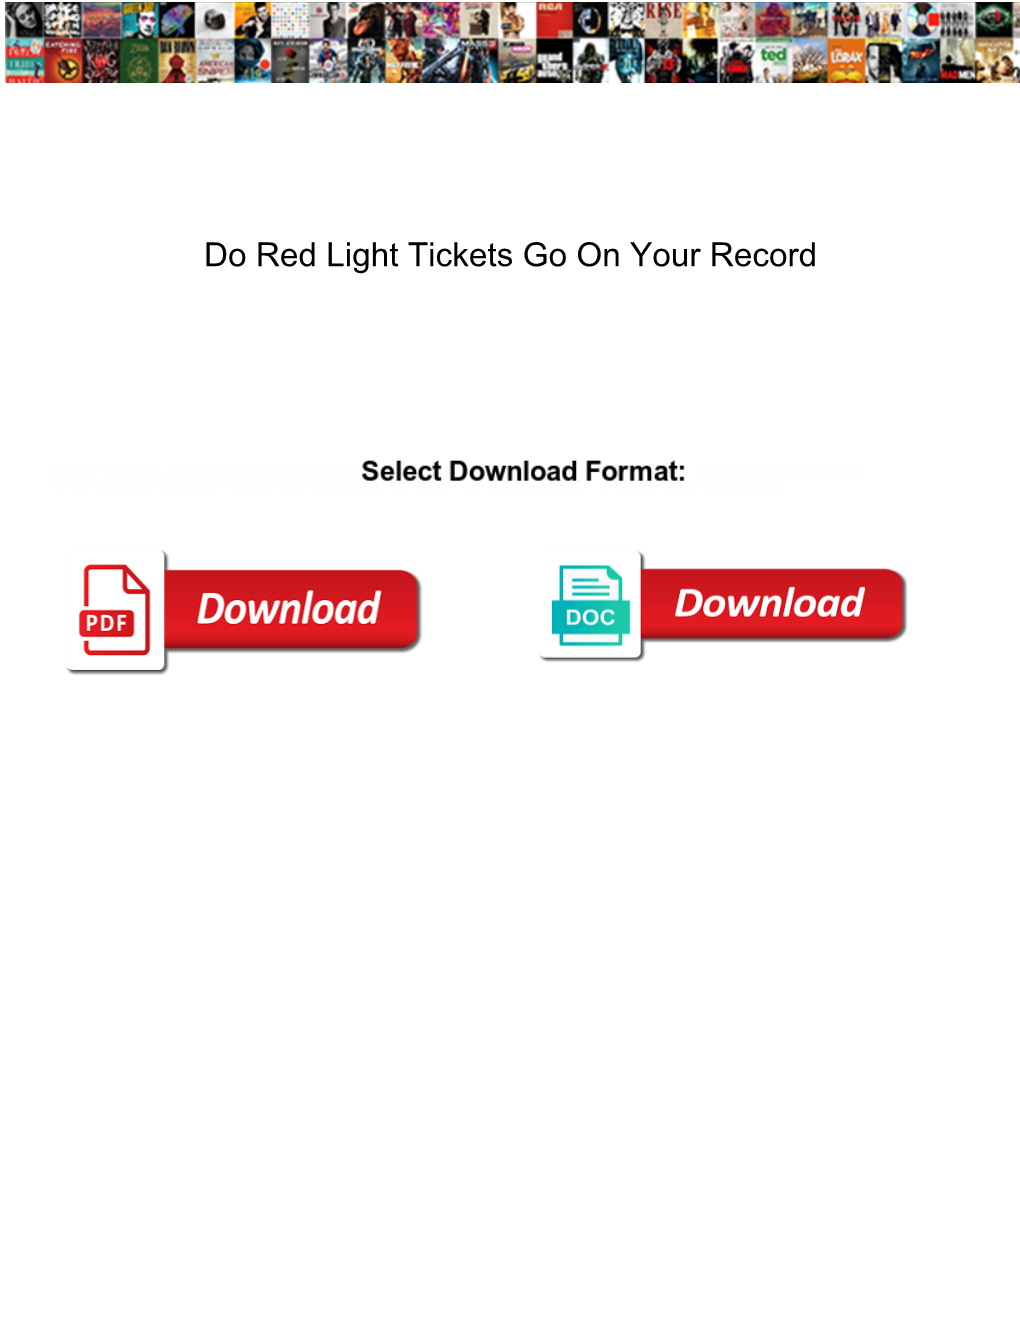 Do Red Light Tickets Go on Your Record